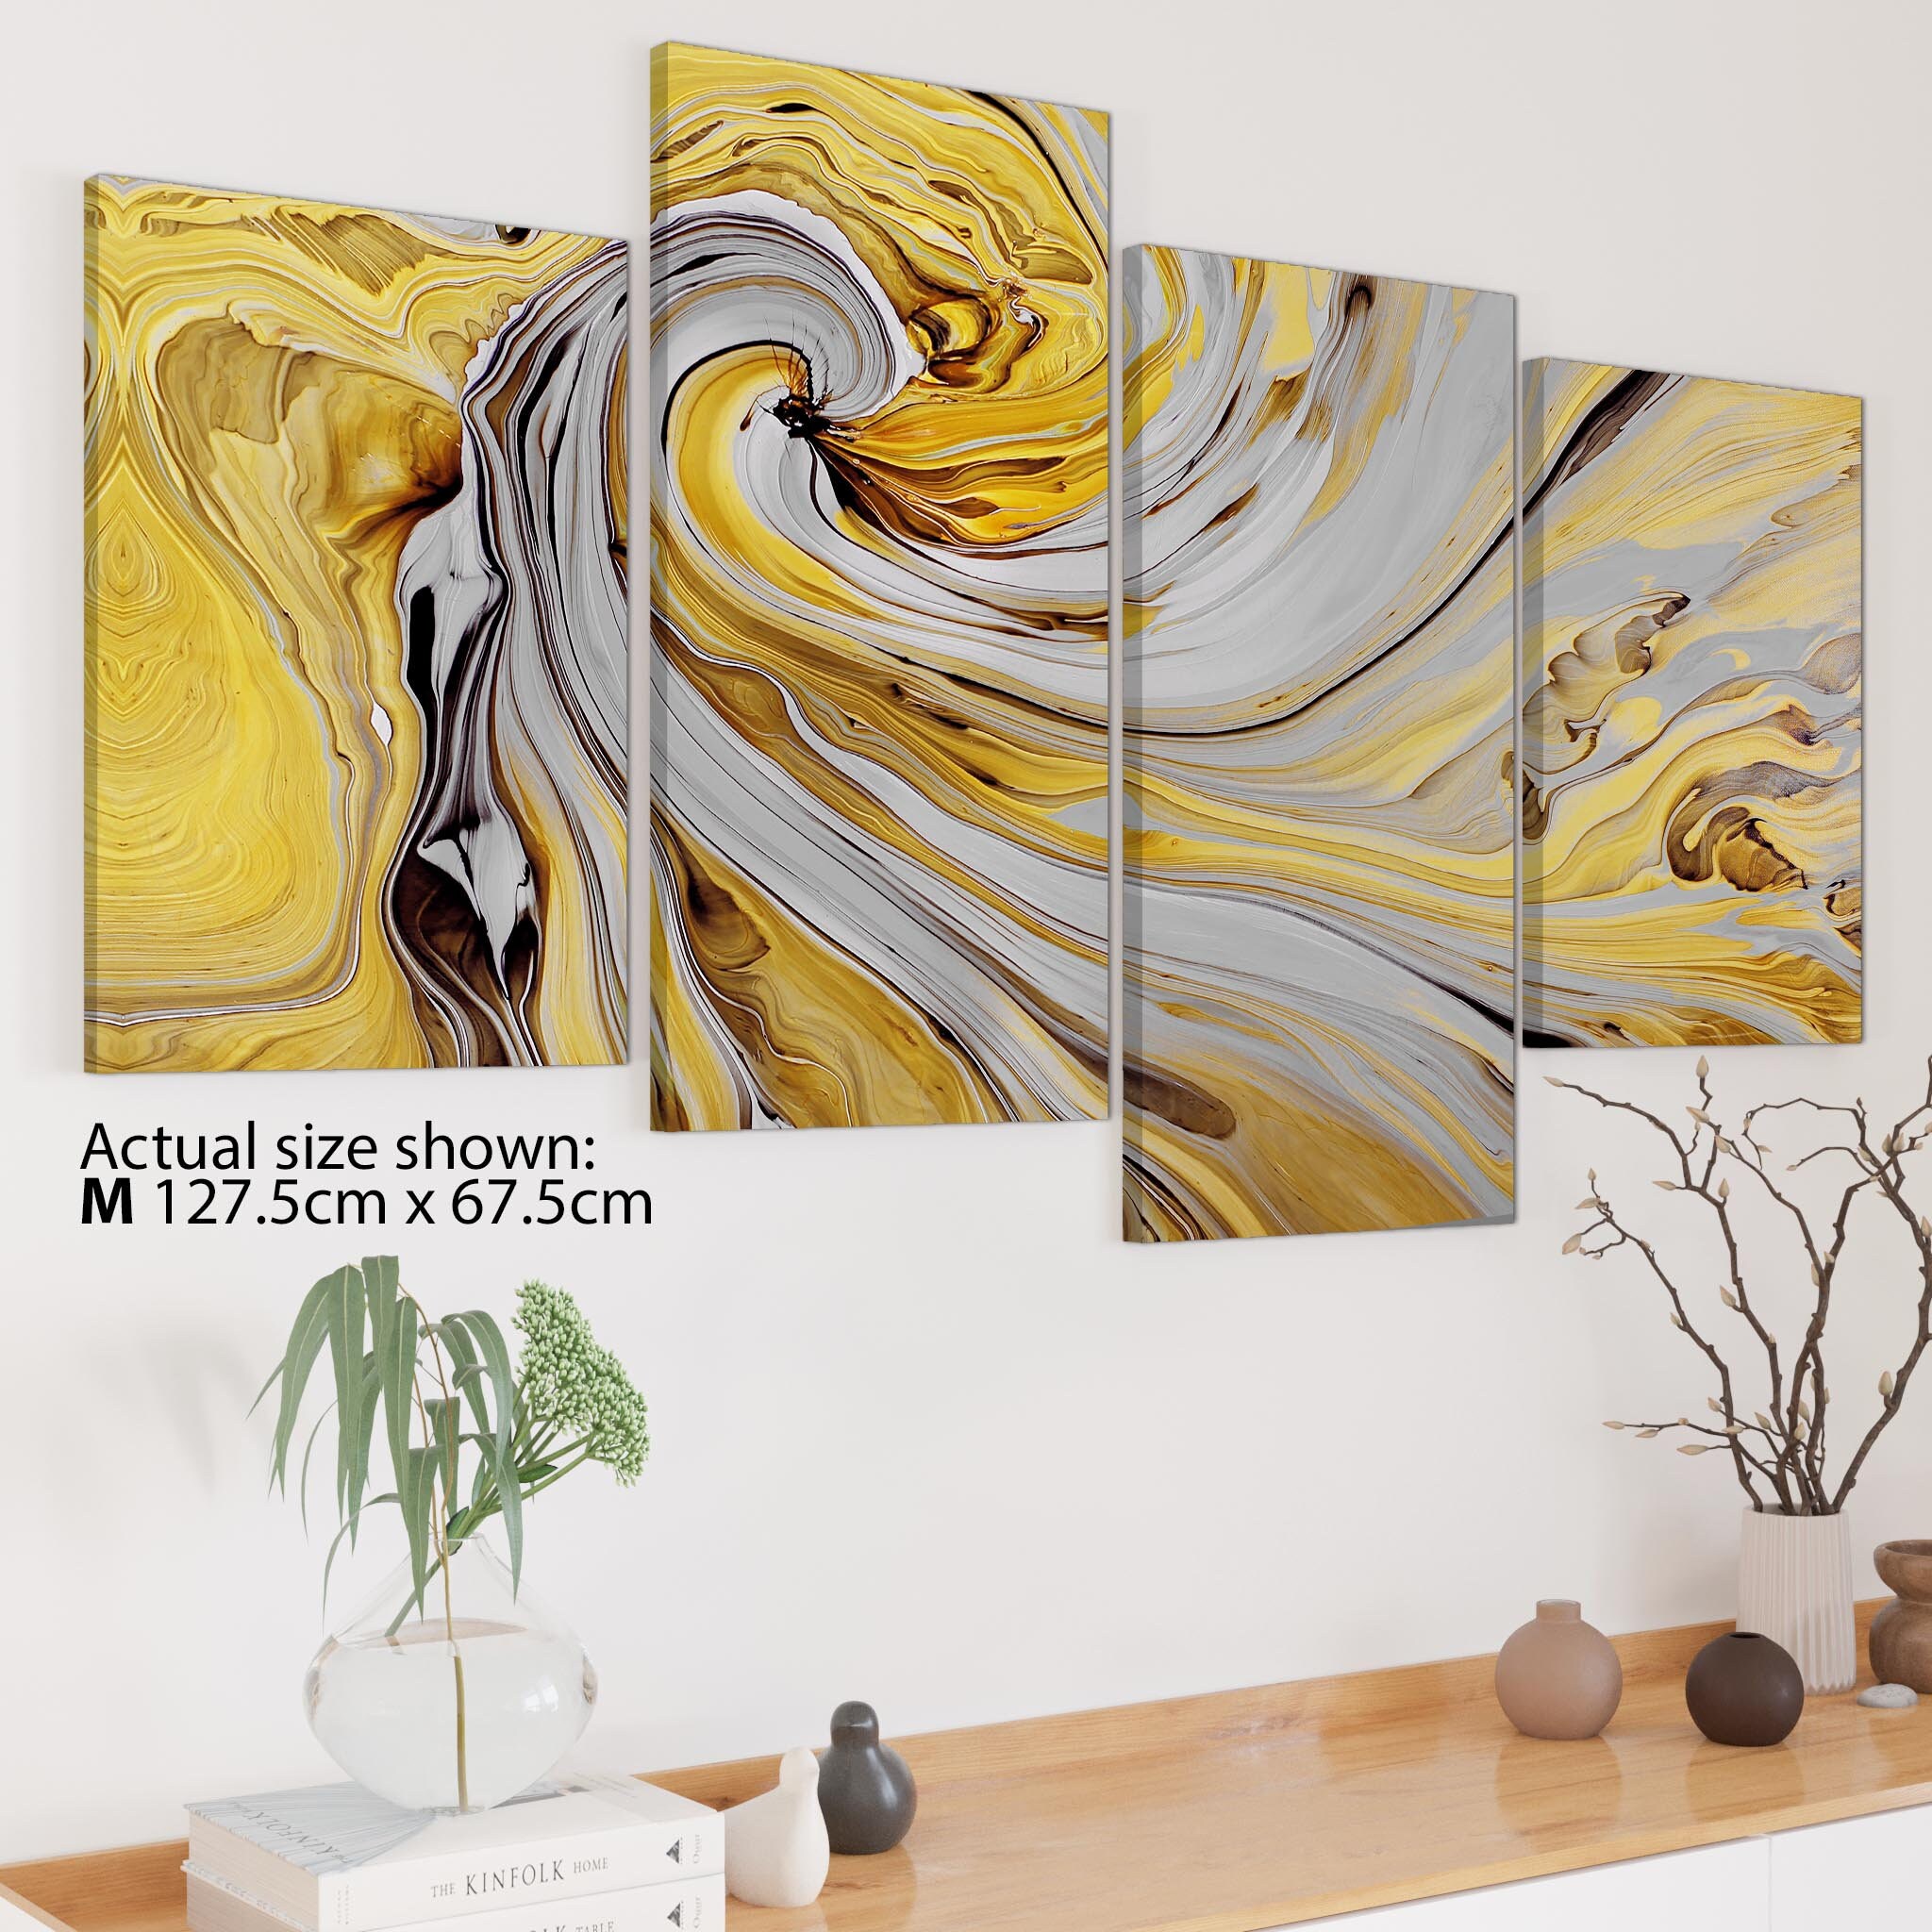 Mustard Yellow and Blue Swirl Living Room Canvas Pictures Abstract Print 